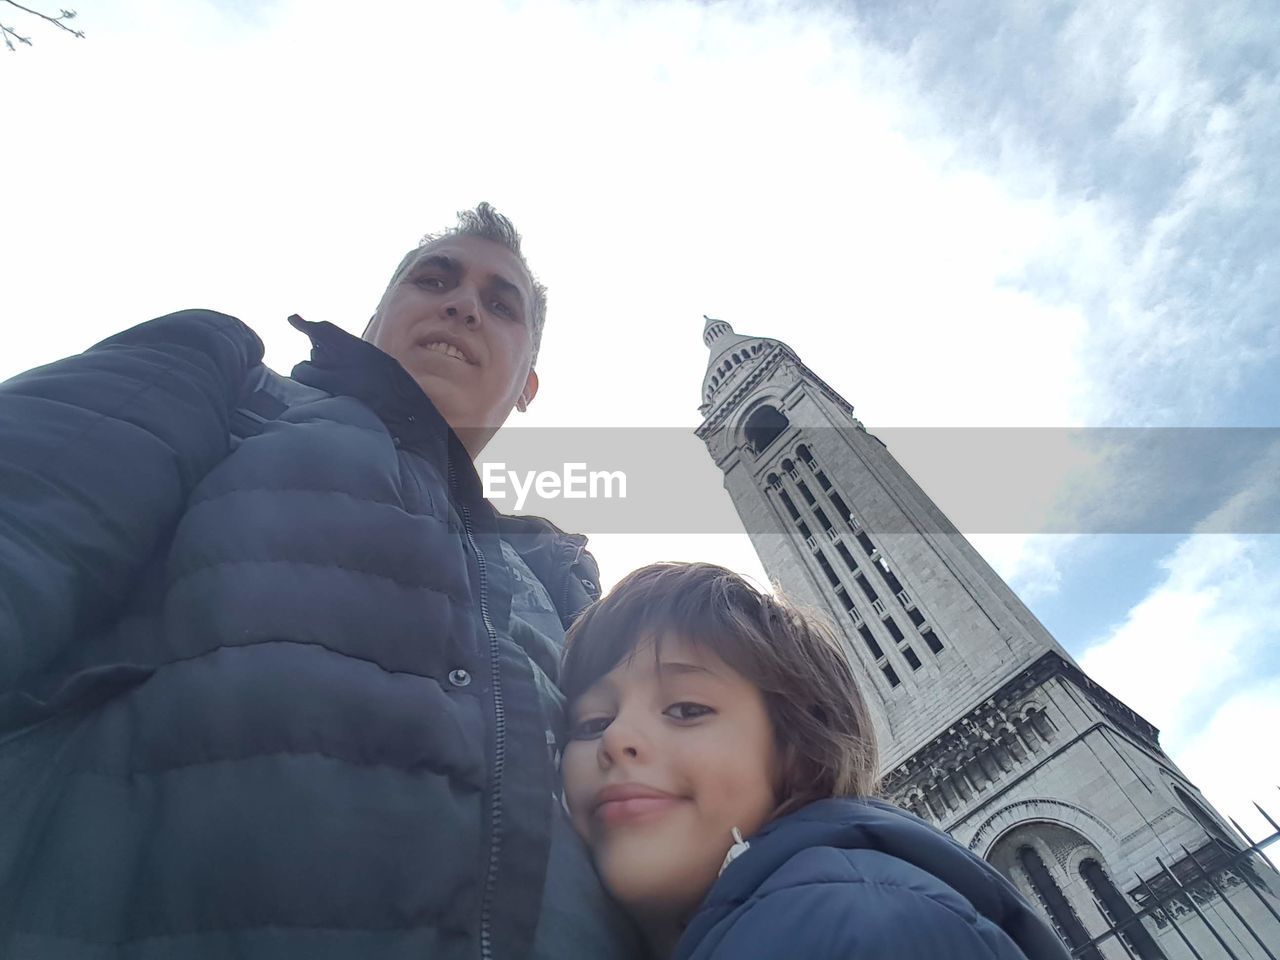 two people, sky, child, low angle view, adult, childhood, togetherness, architecture, men, women, family, cloud, portrait, day, female, nature, bonding, emotion, travel, positive emotion, built structure, parent, one parent, looking, building exterior, travel destinations, city, blue, leisure activity, outdoors, smiling, love, lifestyles, person, tourism, happiness, clothing, headshot, looking up, winter, vacation, trip